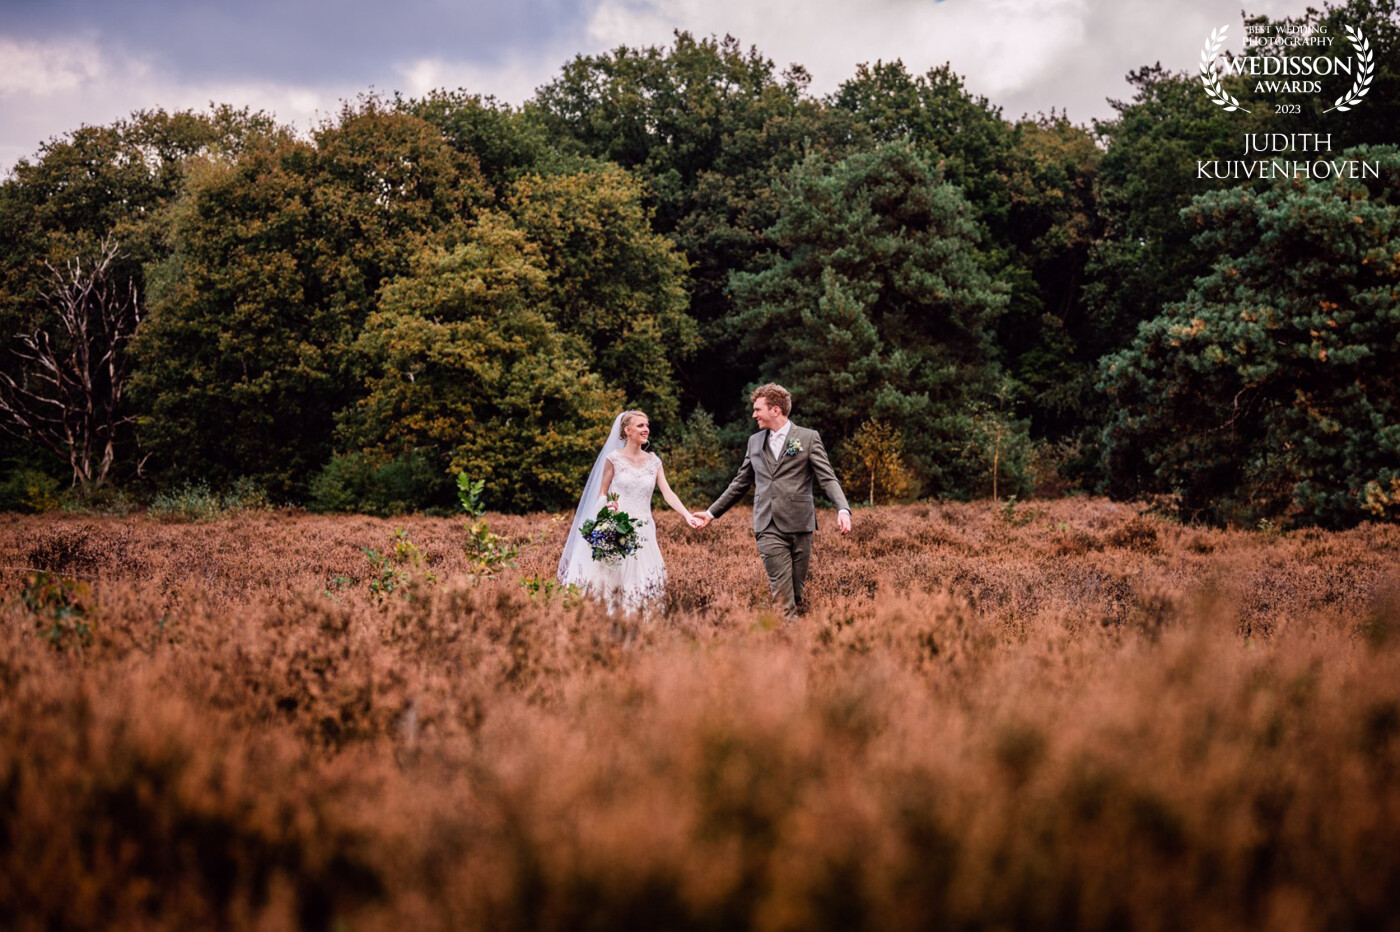 This beautiful couple got married on a nice autumn day. I love the warm colors in this picture and the joy and love of this couple!